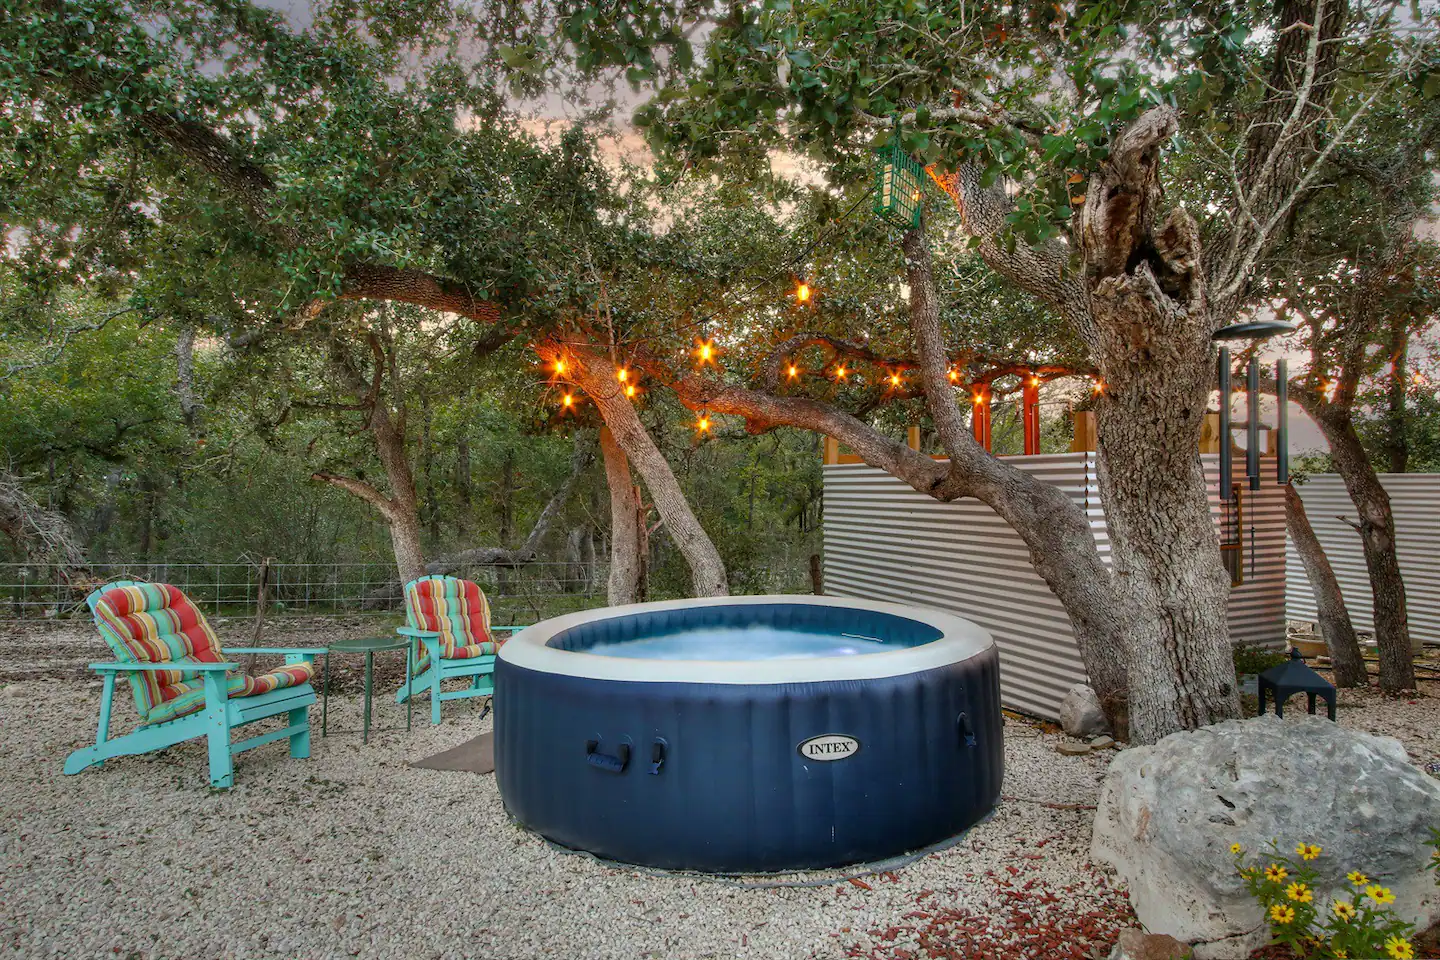 The hot tub beneath the trees is fantastic.